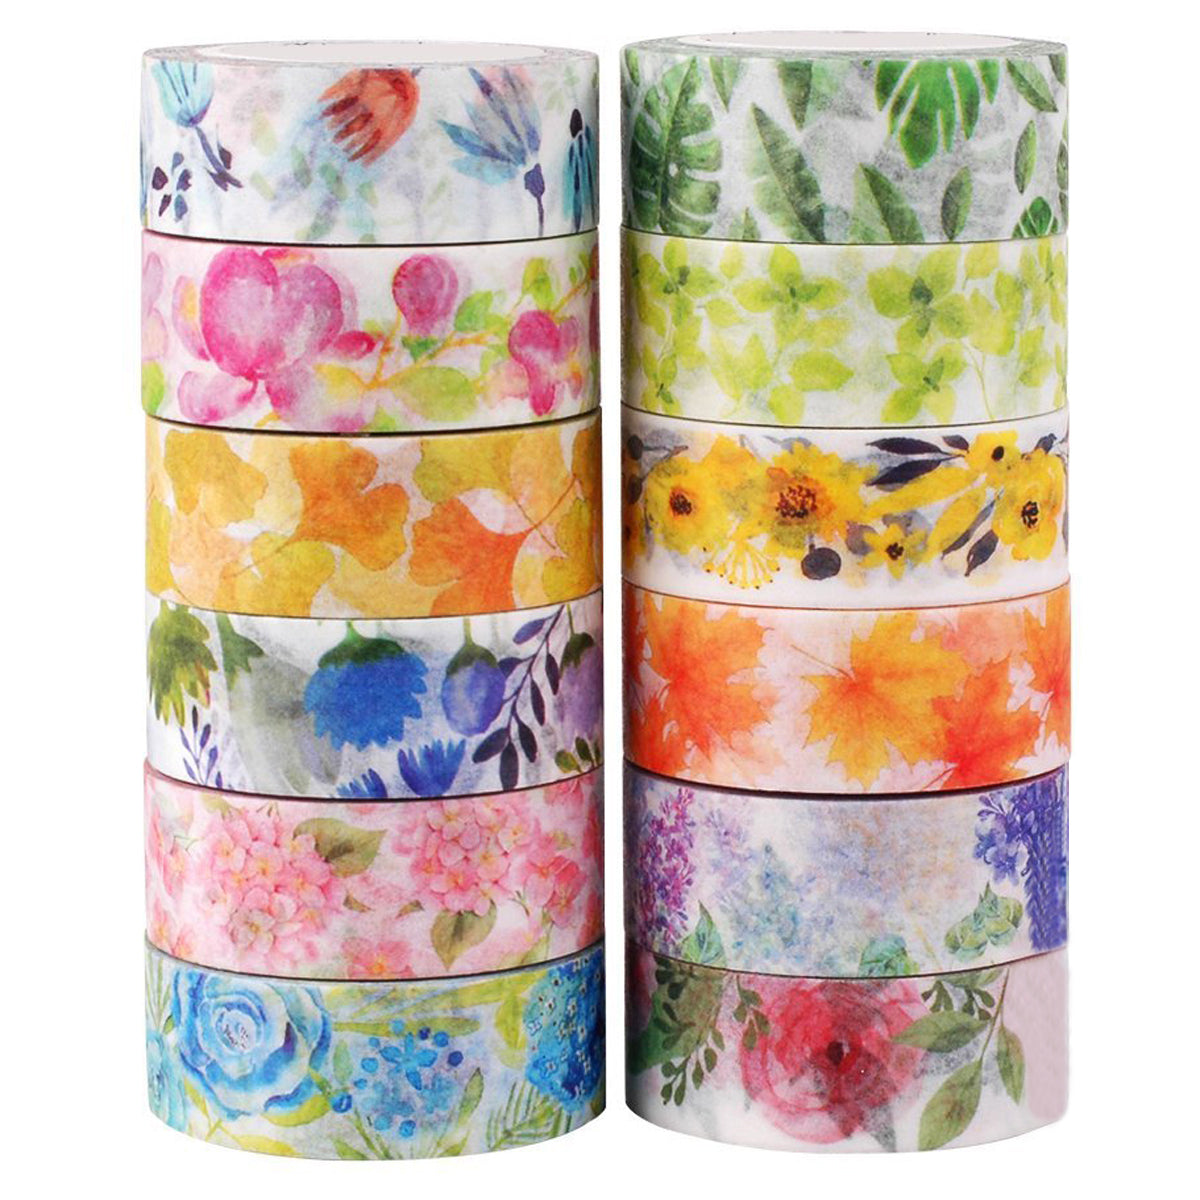 Knaid Vintage Washi Tape Set, Assorted 5 Rolls of Decorative Colored  Masking Tapes for Scrapbooking, DIY Decor and Crafts, Bullet Journals,  Planners